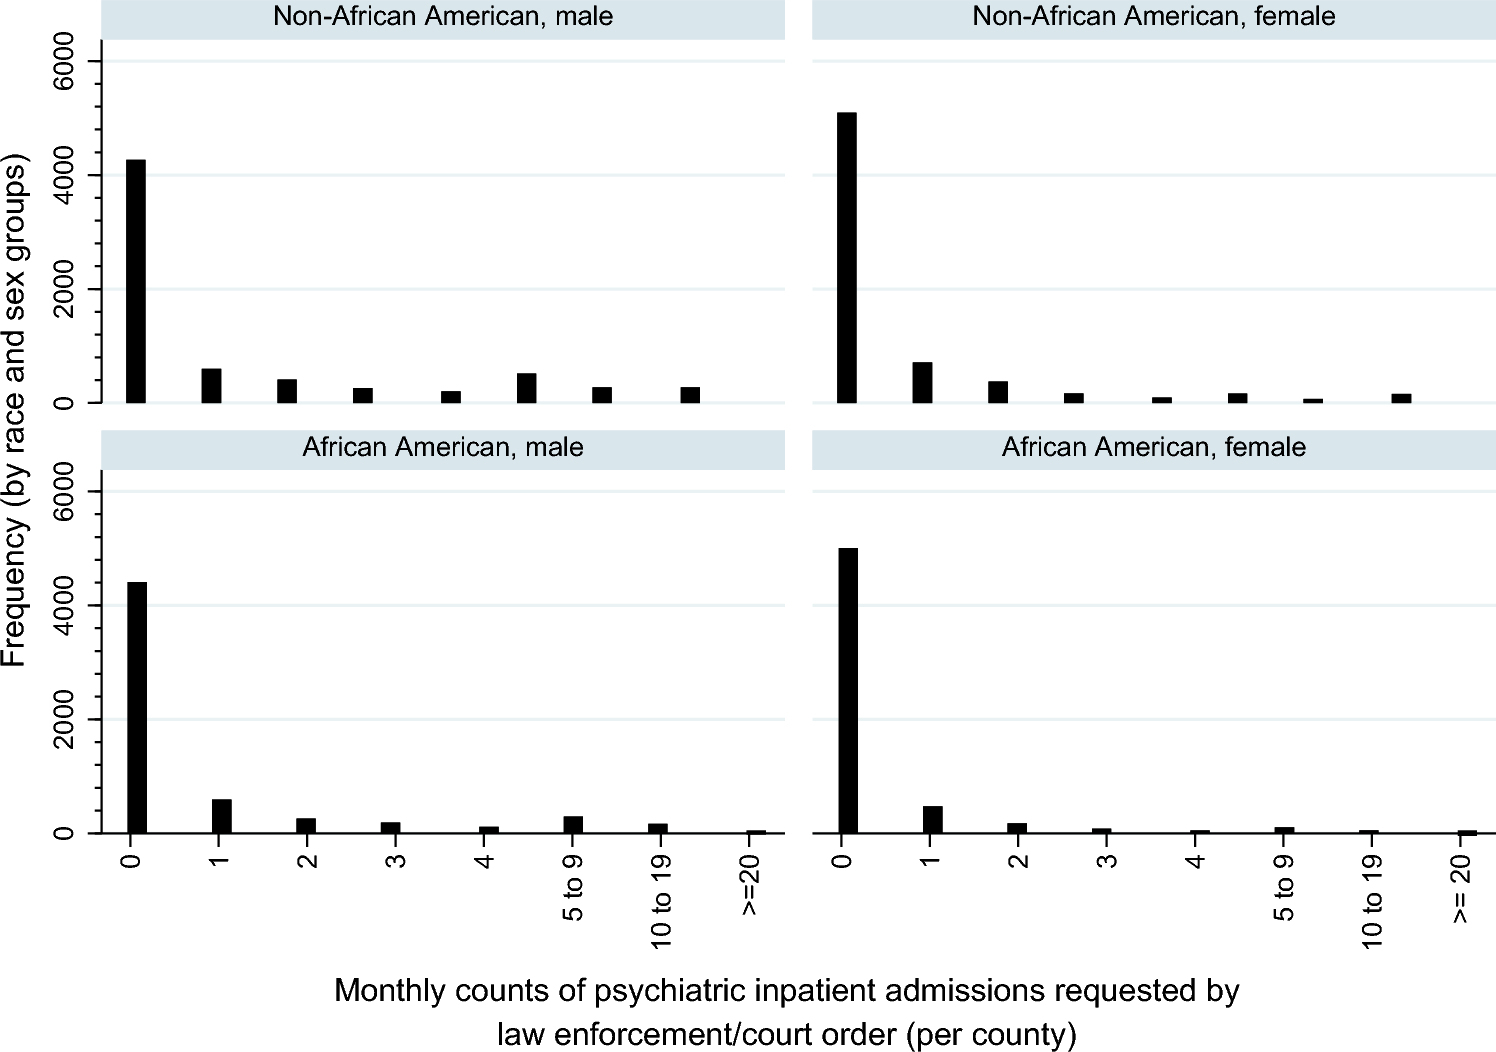 Racial disparities in law enforcement/court-ordered psychiatric inpatient admissions after the 2008 recession: a test of the frustration–aggression–displacement hypothesis